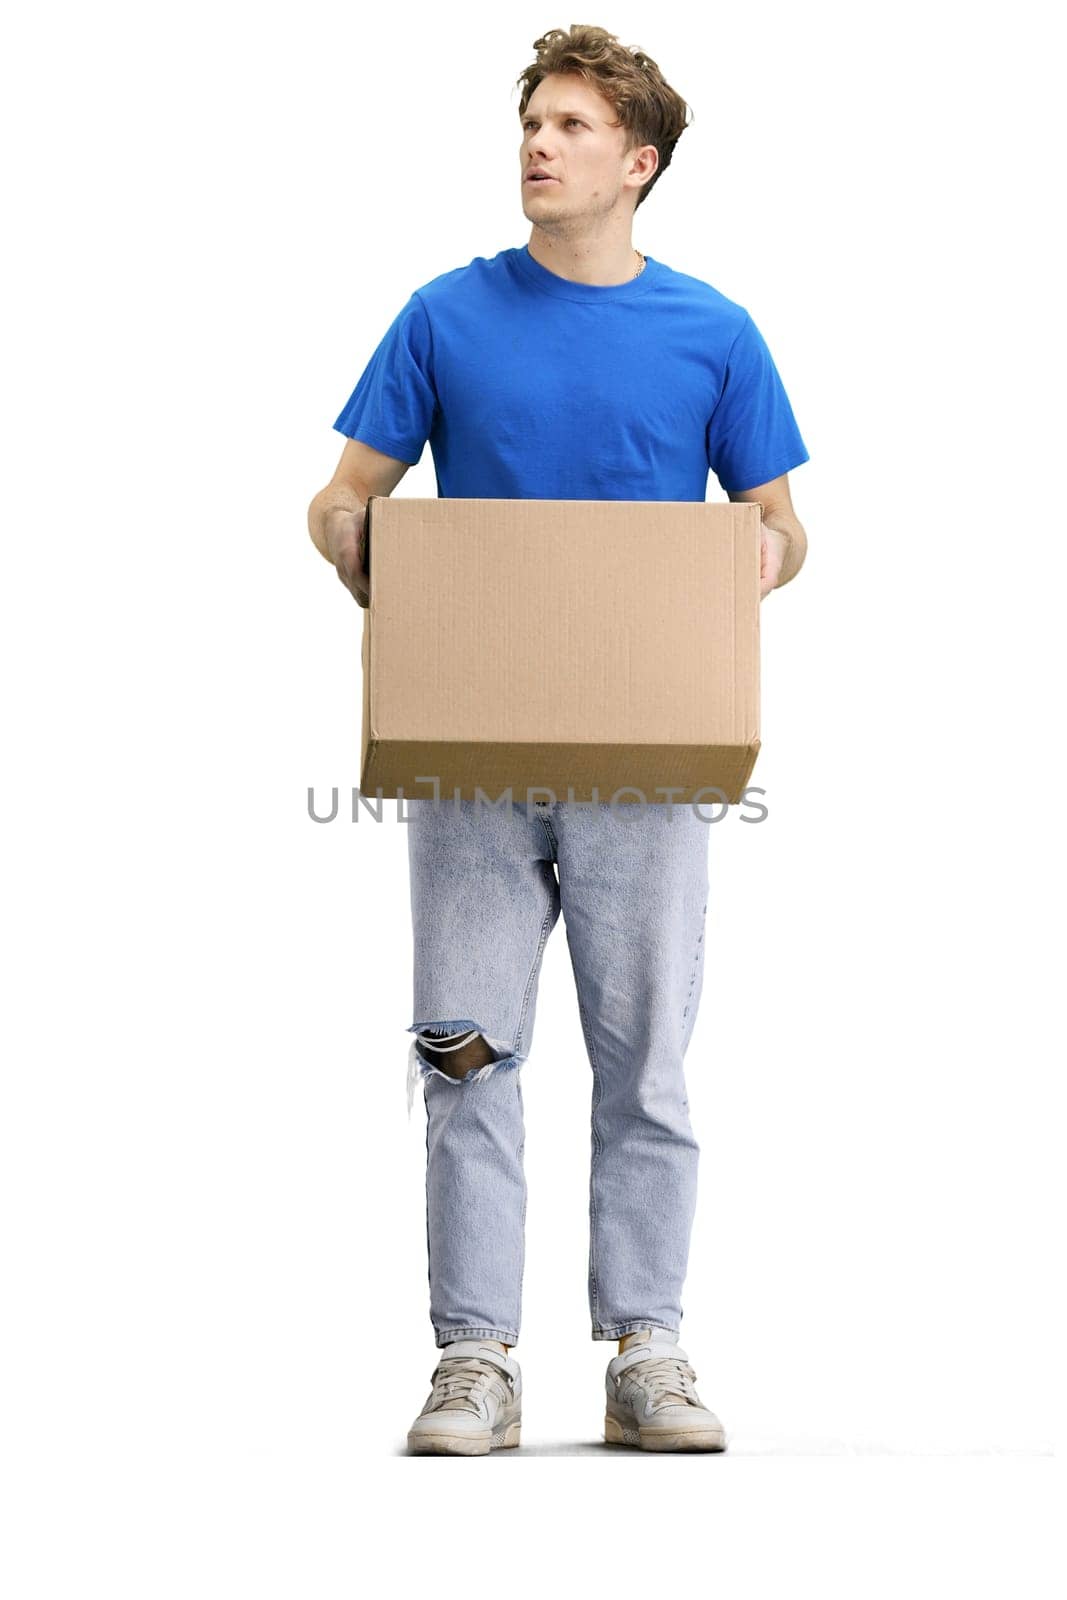 The deliveryman, full-length, on a white background, with a box.